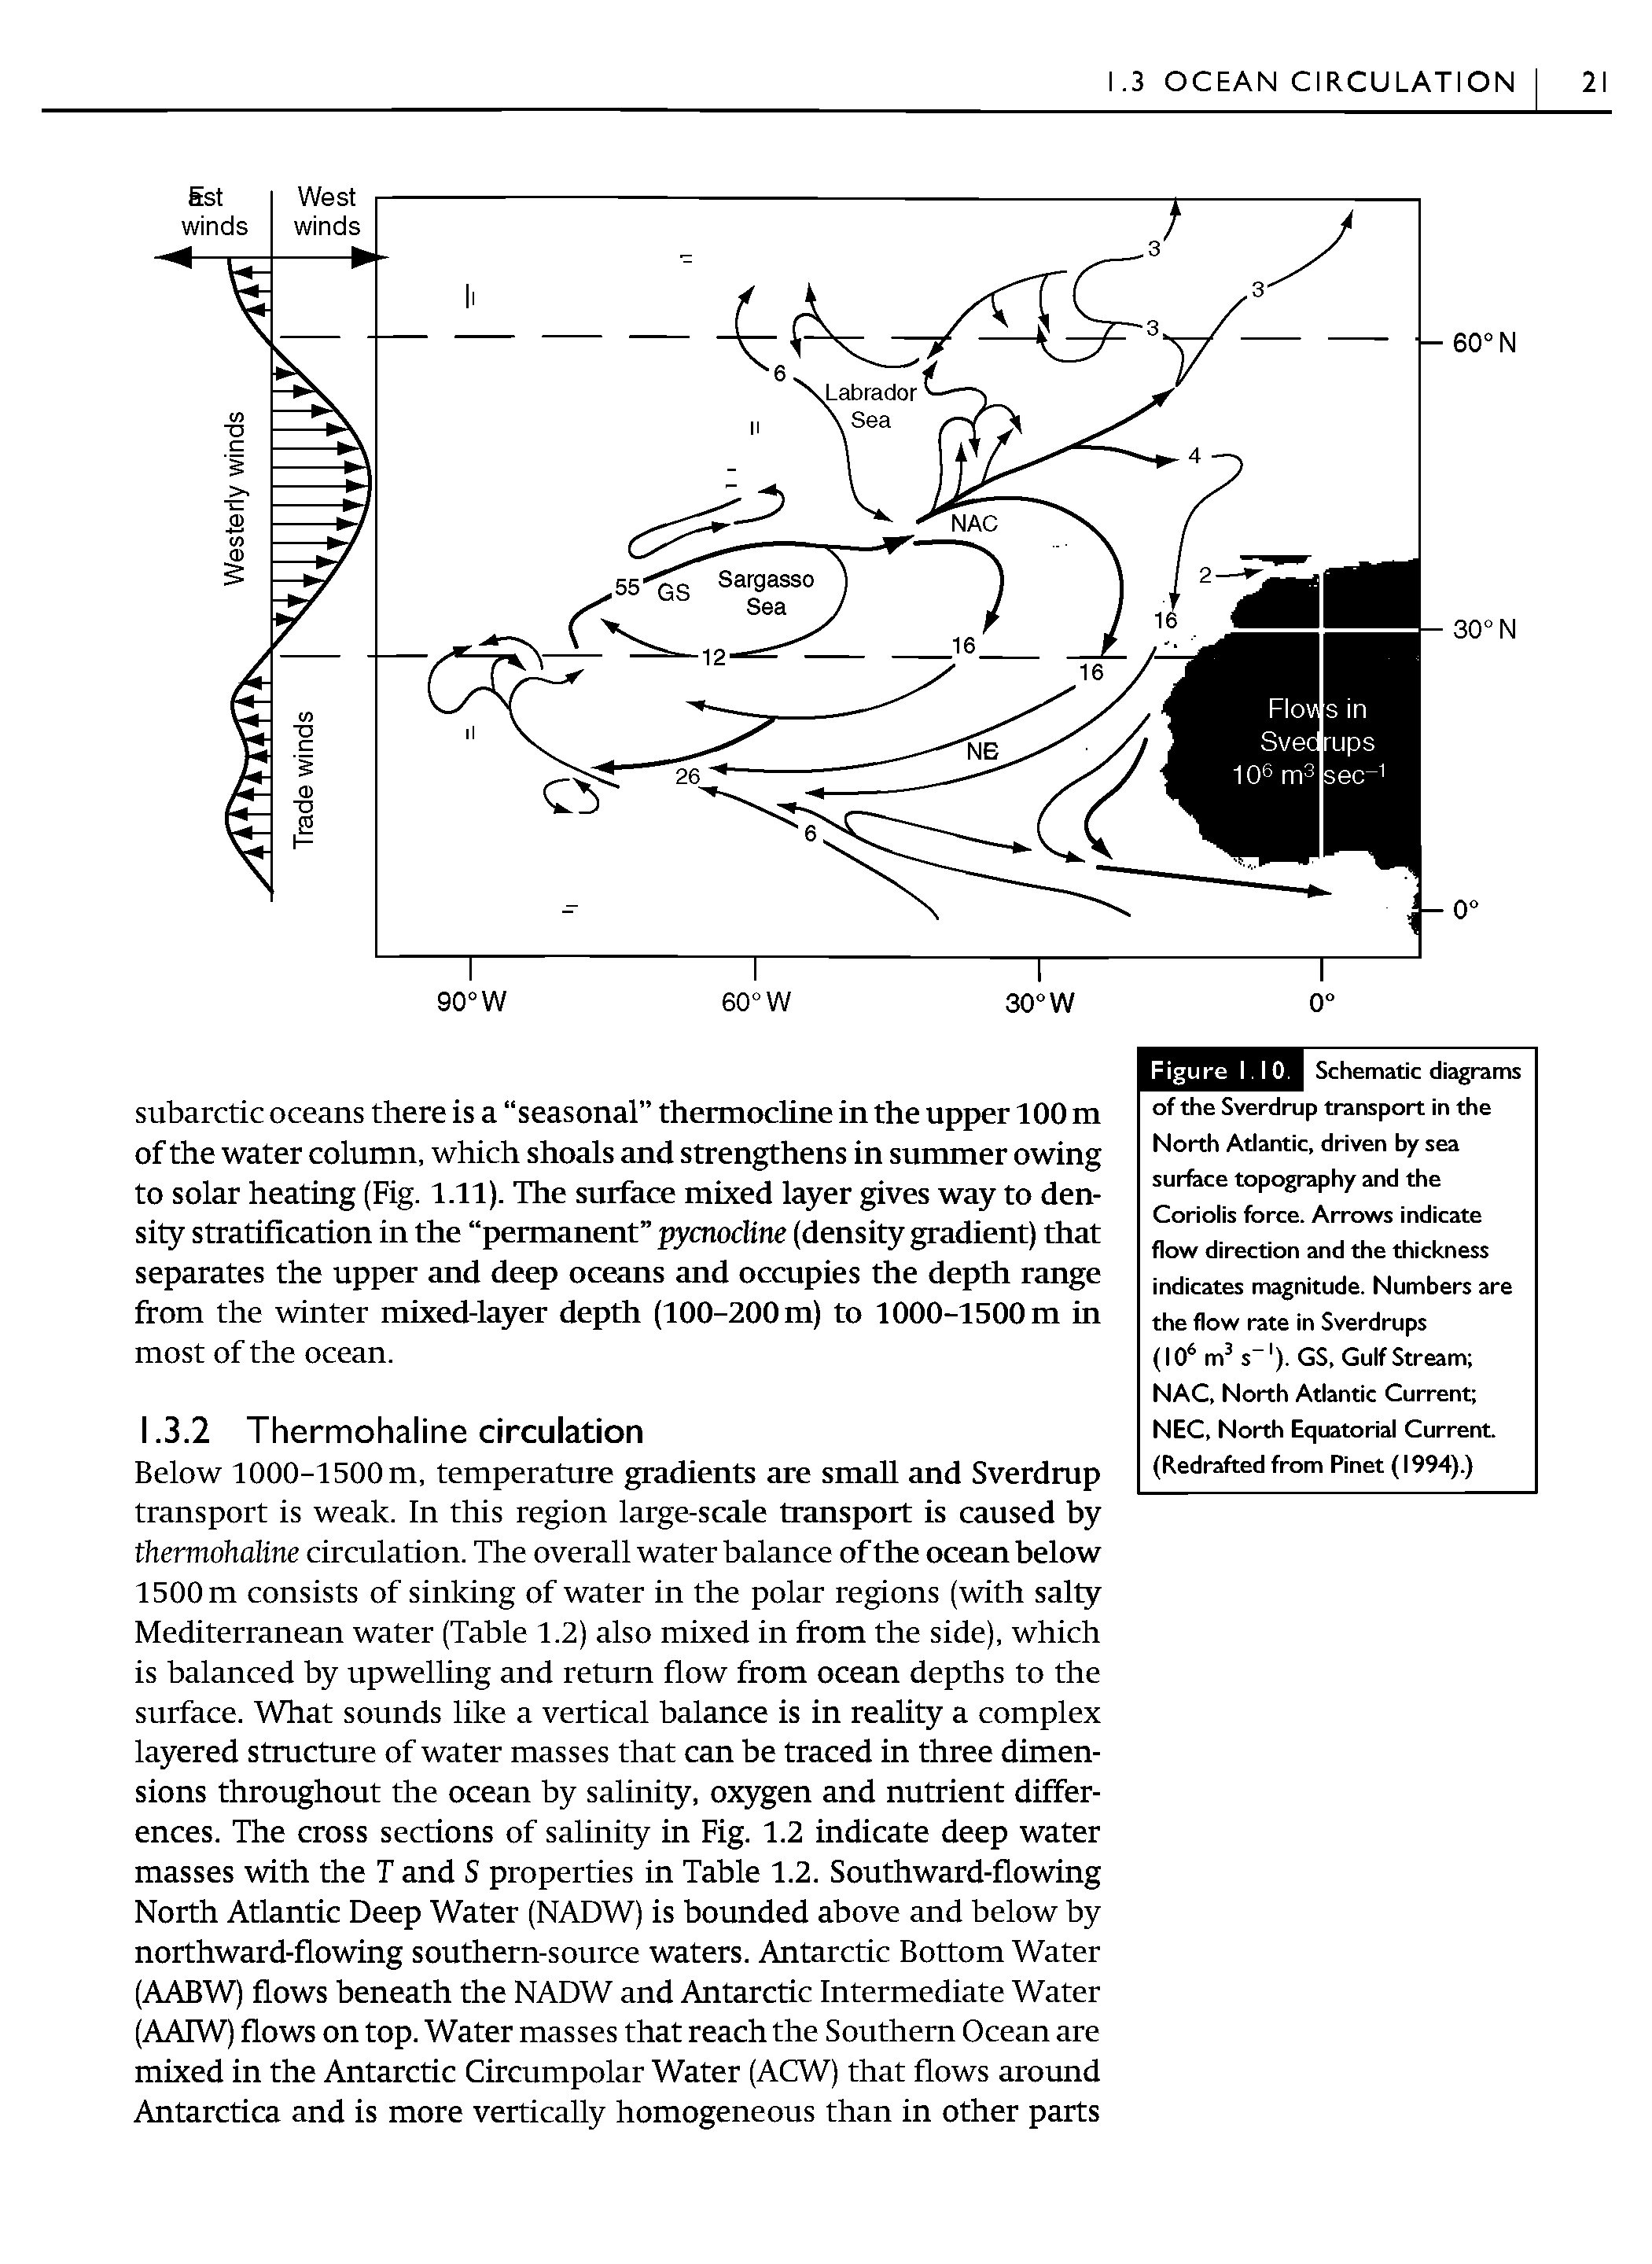 Schematic diagrams of the Sverdrup transport in the North Atlantic, driven by sea surface topography and the Coriolis force. Arrows indicate flow direction and the thickness indicates magnitude. Numbers are the flow rate in Sverdrups (10 m s ). GS, Gulf Stream NAC, North Atlantic Current NEC, North Equatorial Current. (Redrafted from Pinet (1994).)...